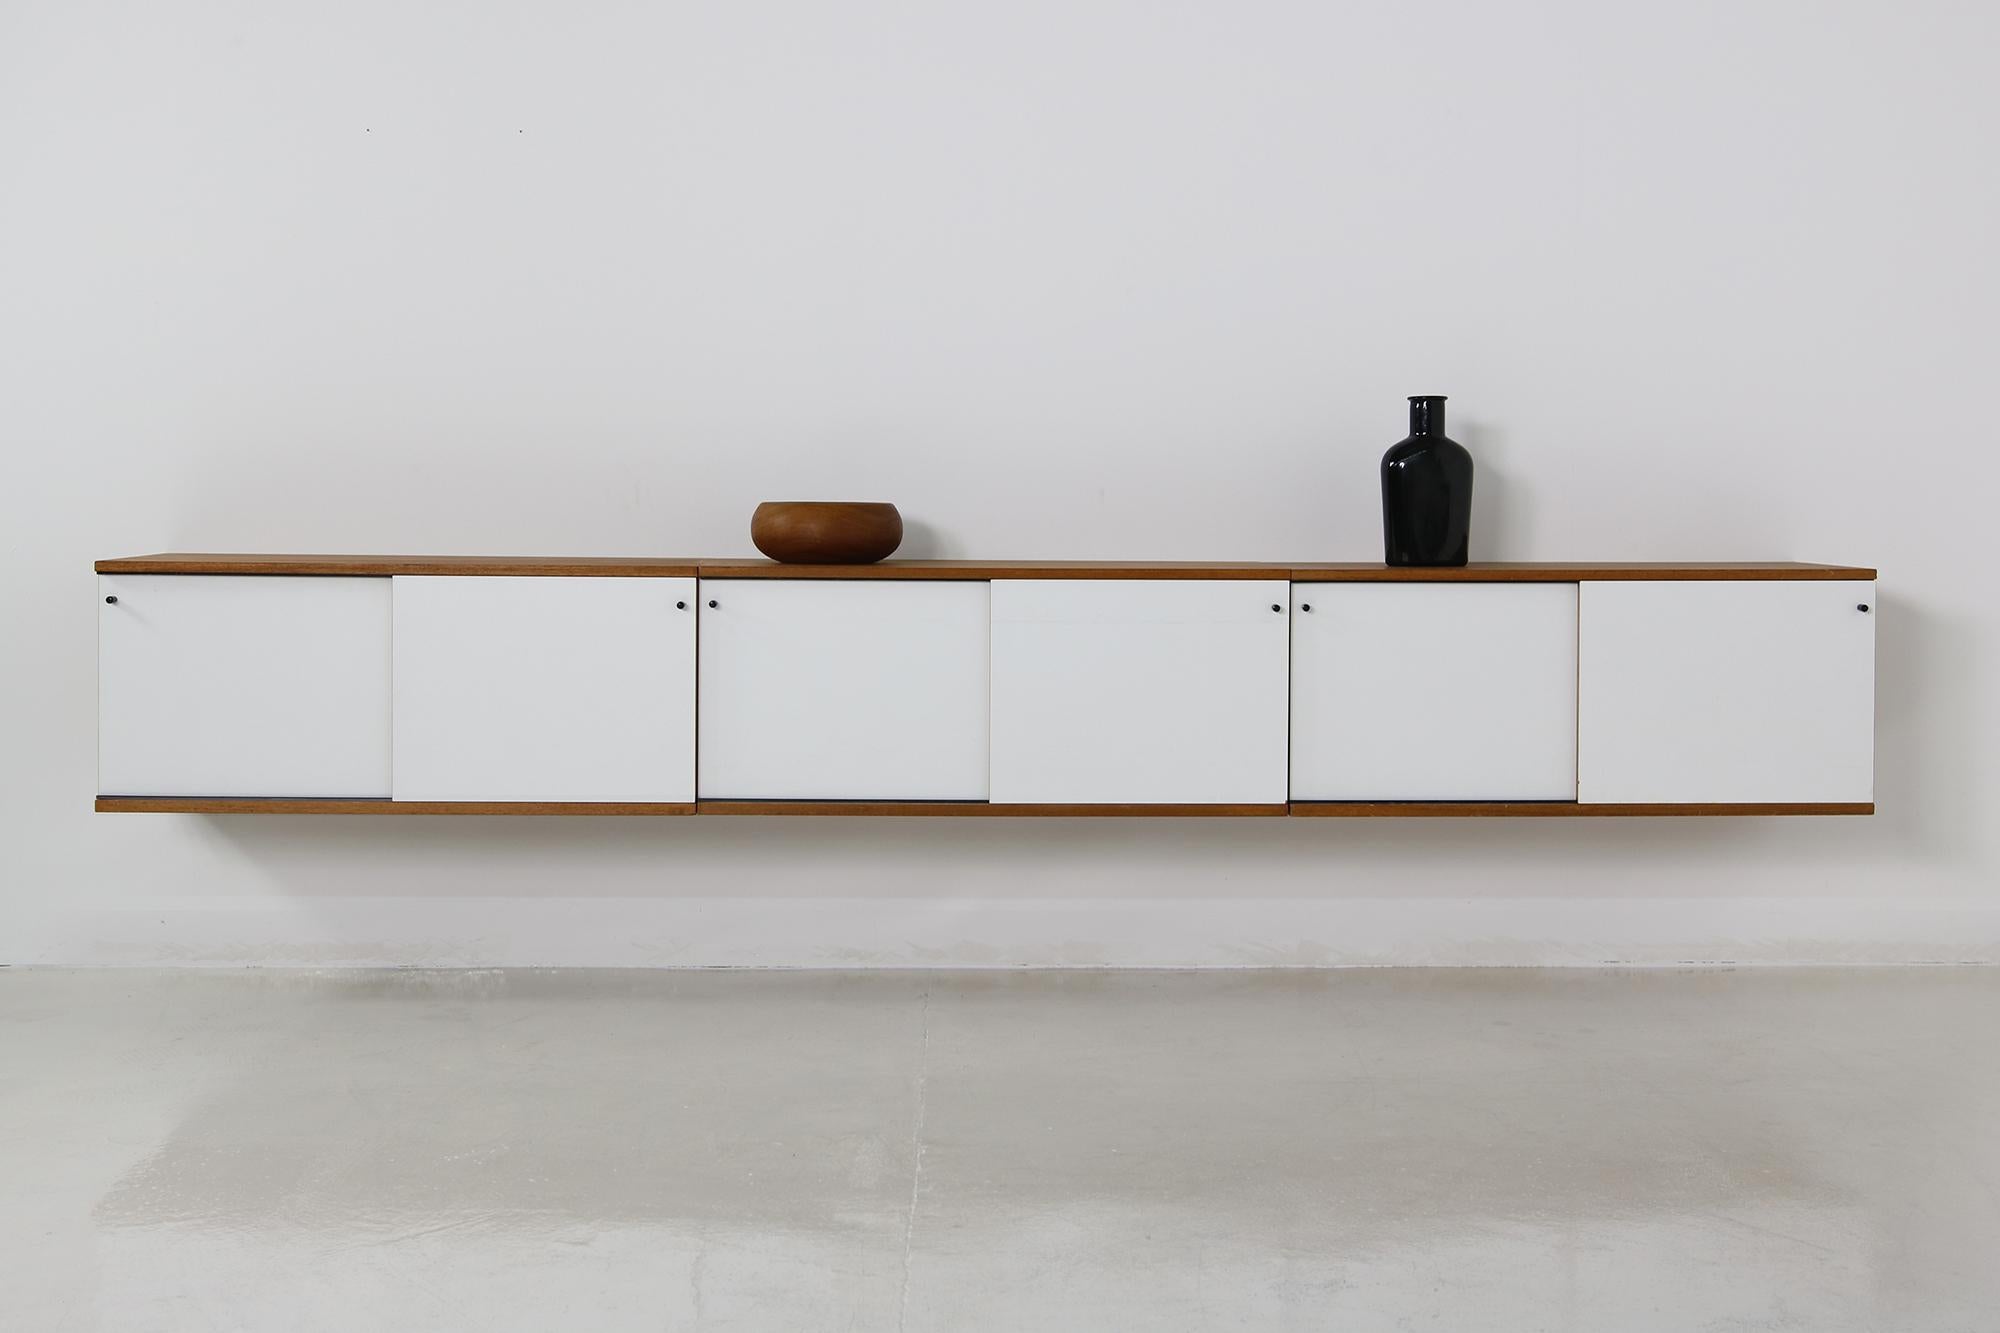 Rare 1960s teak sideboard system, wall-mounted, 3 parts, each one ca. 95 x 40 x 40 cm overall ca. 285 x 40 x 40 cm with white laminated sliding doors, black handles, two of them with a shelf inside, good vintage condition, beautiful Minimalist and